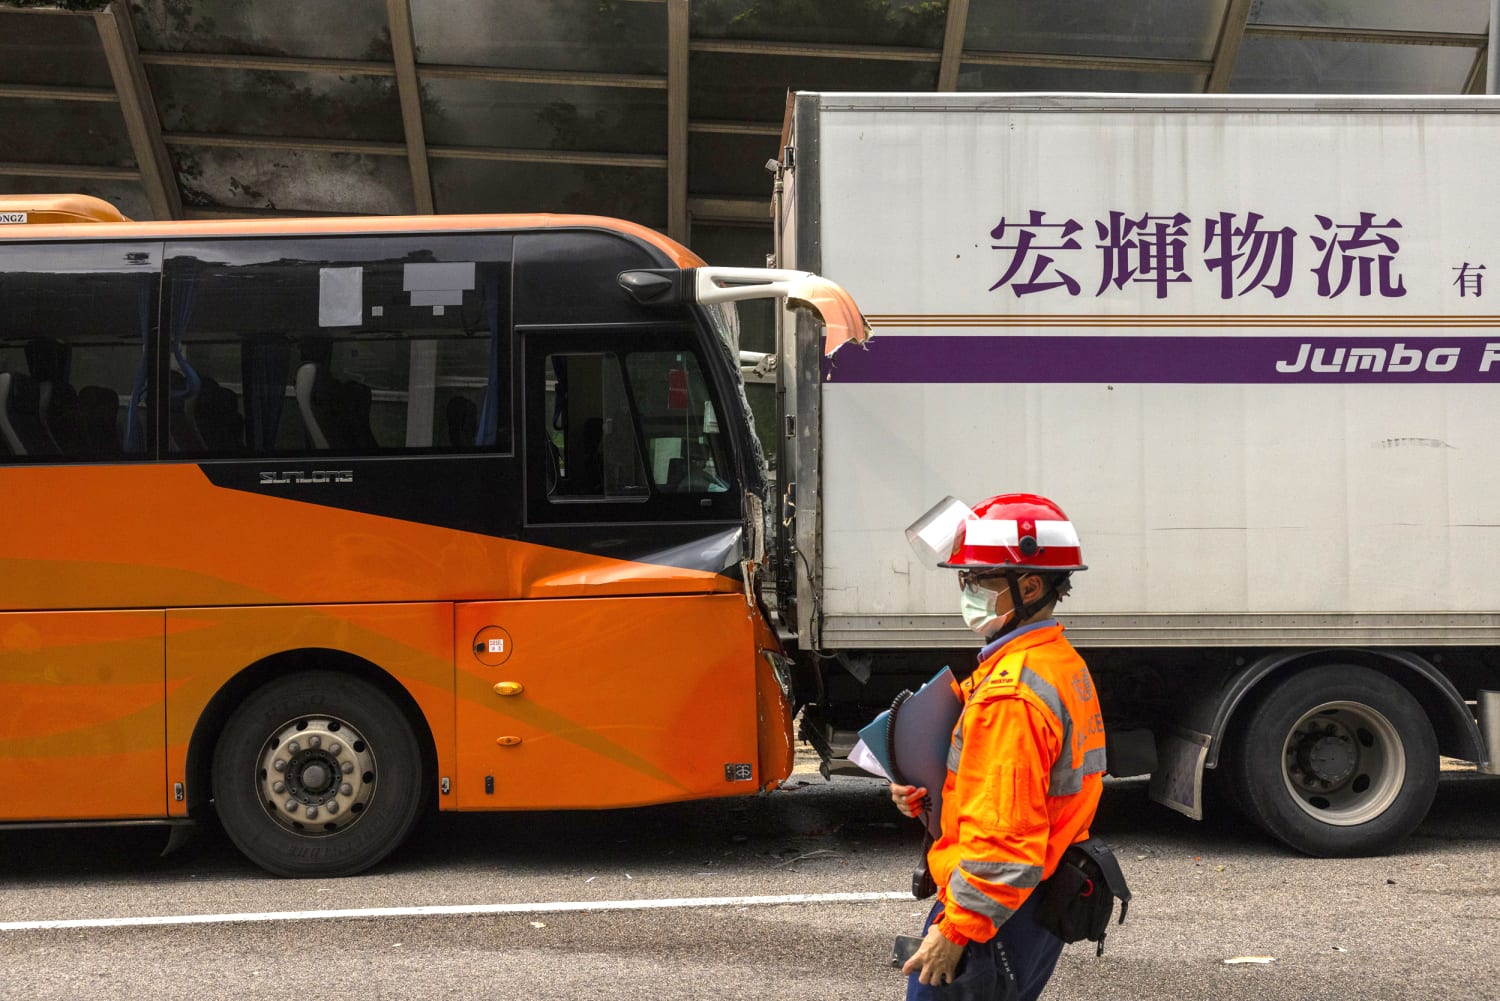 Hong Kong traffic accident leaves 87 people injured